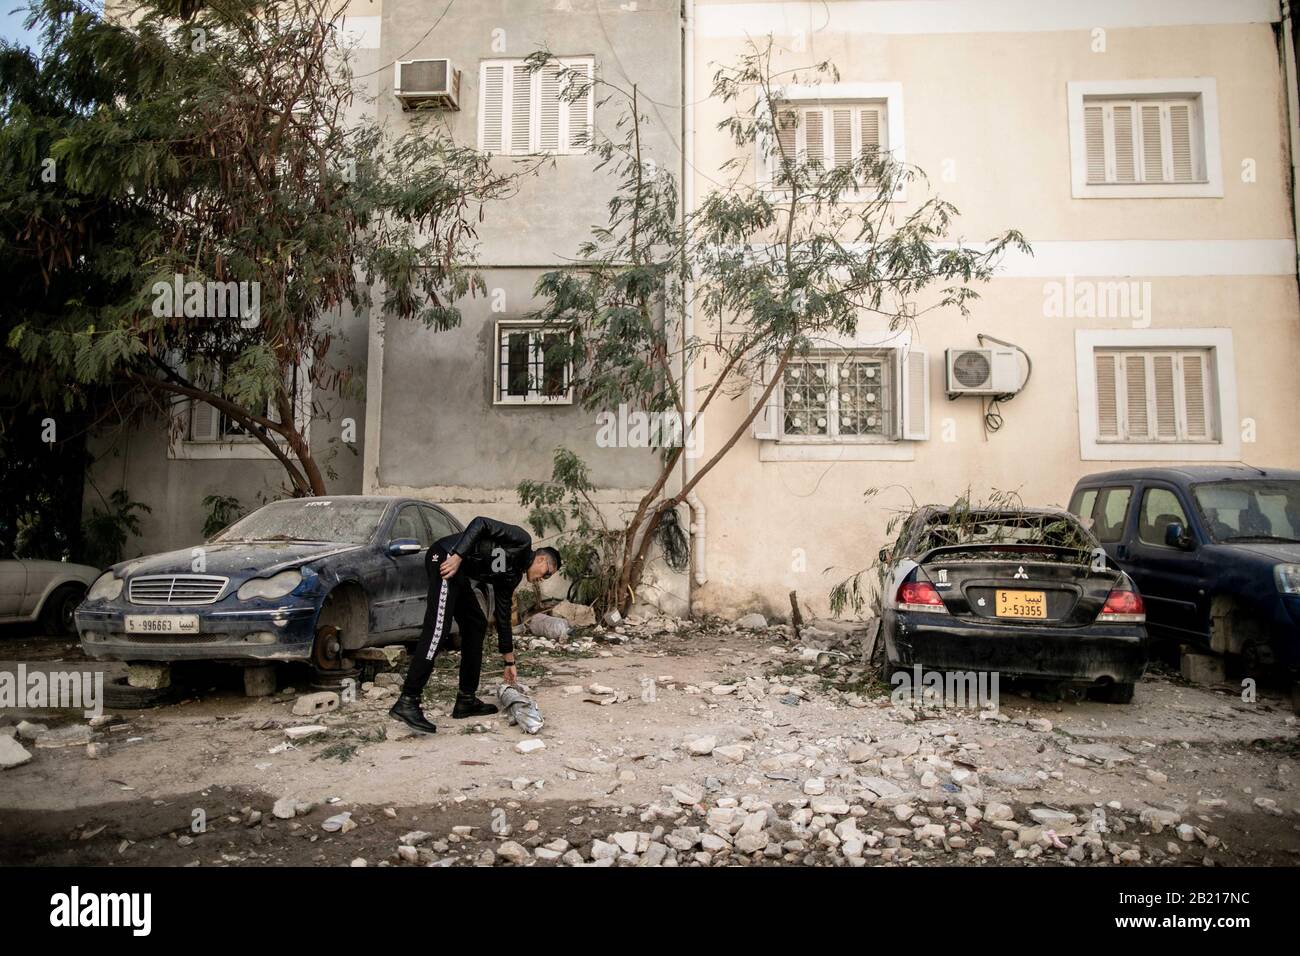 Tripoli, Libya. 28th Feb, 2020. A policeman inspects the damage around a building after a heavy shelling attack in Tripoli, Libya, on Feb. 28, 2020. The forces of the UN-backed Libyan government said on Friday that the rival east-based army attacked the Mitiga International Airport and its surroundings, as well as a number of residential neighborhoods, in Tripoli with heavy shelling. Credit: Amru Salahuddien/Xinhua/Alamy Live News Stock Photo